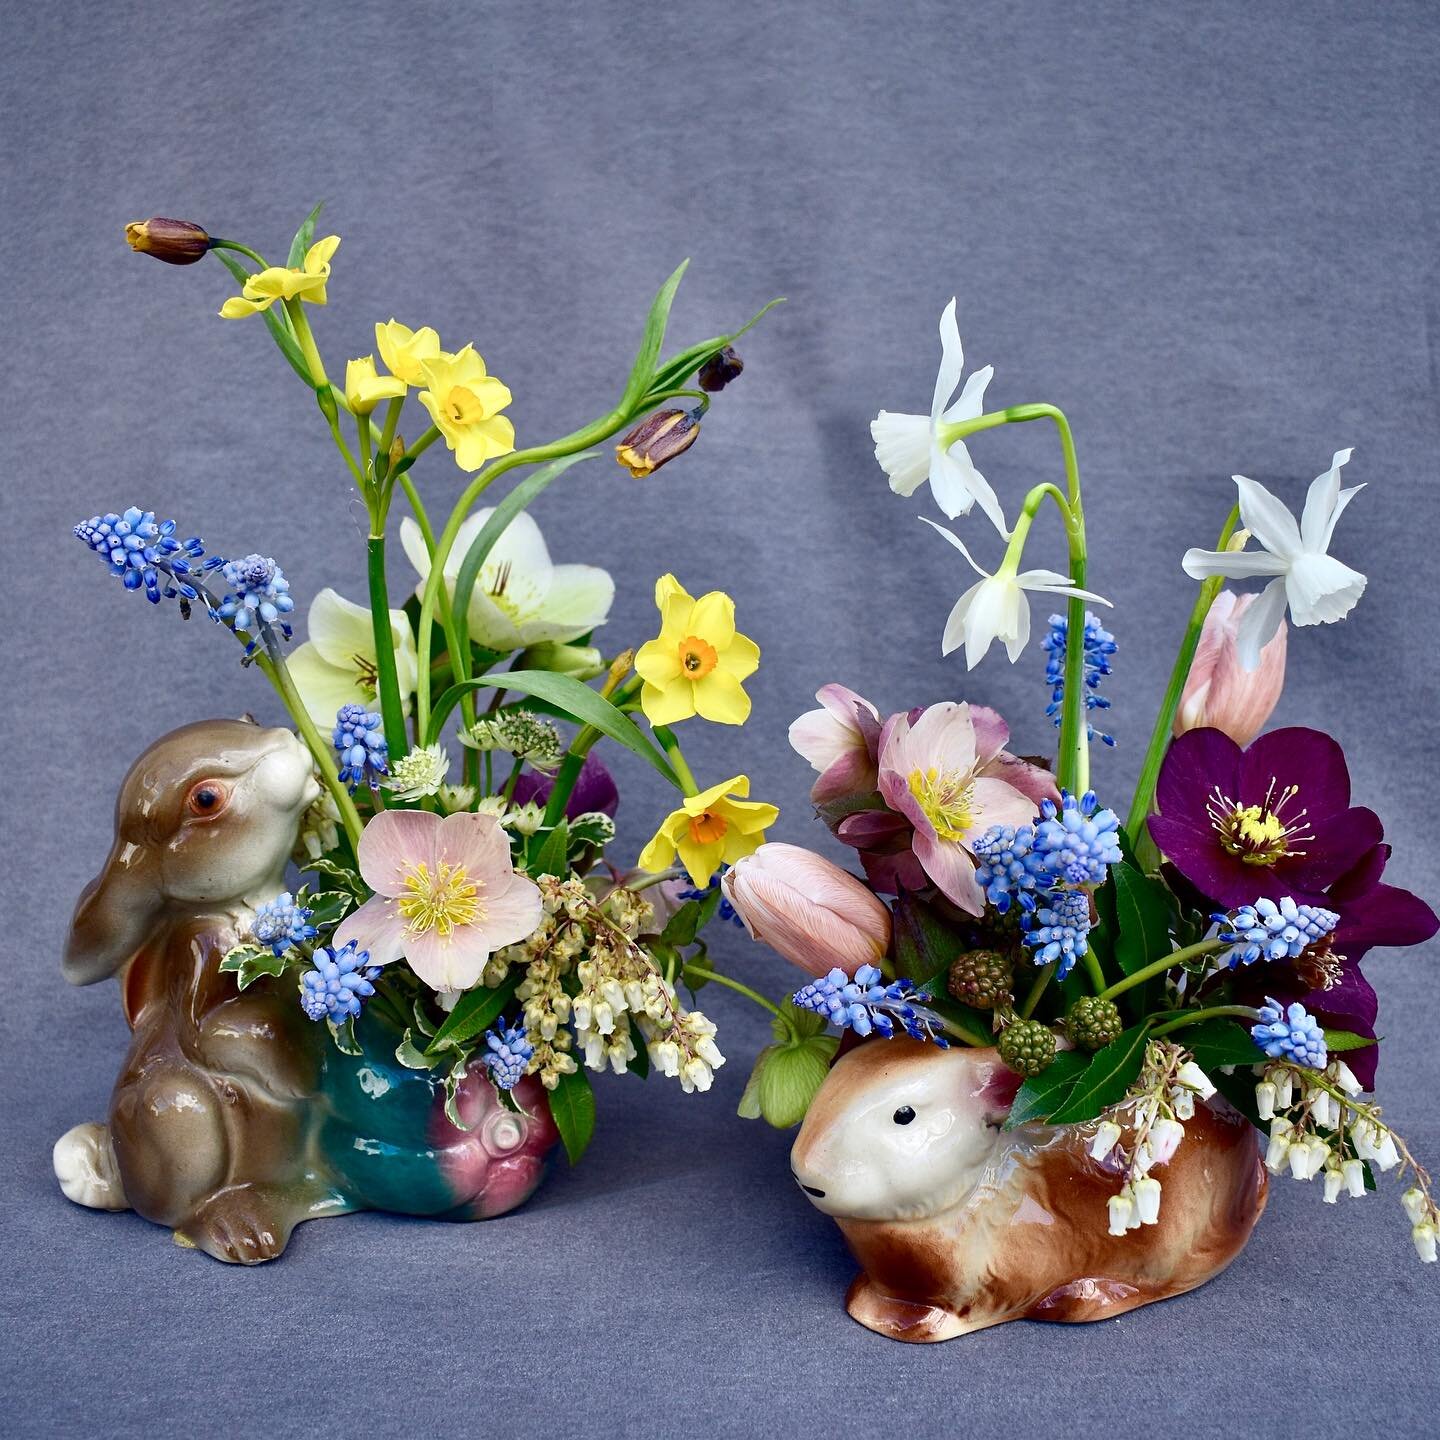 Happy Easter!  These vintage bunnies want to share some spring flower goodness with you. Hope you are enjoying a relaxing and tasty Easter Sunday!